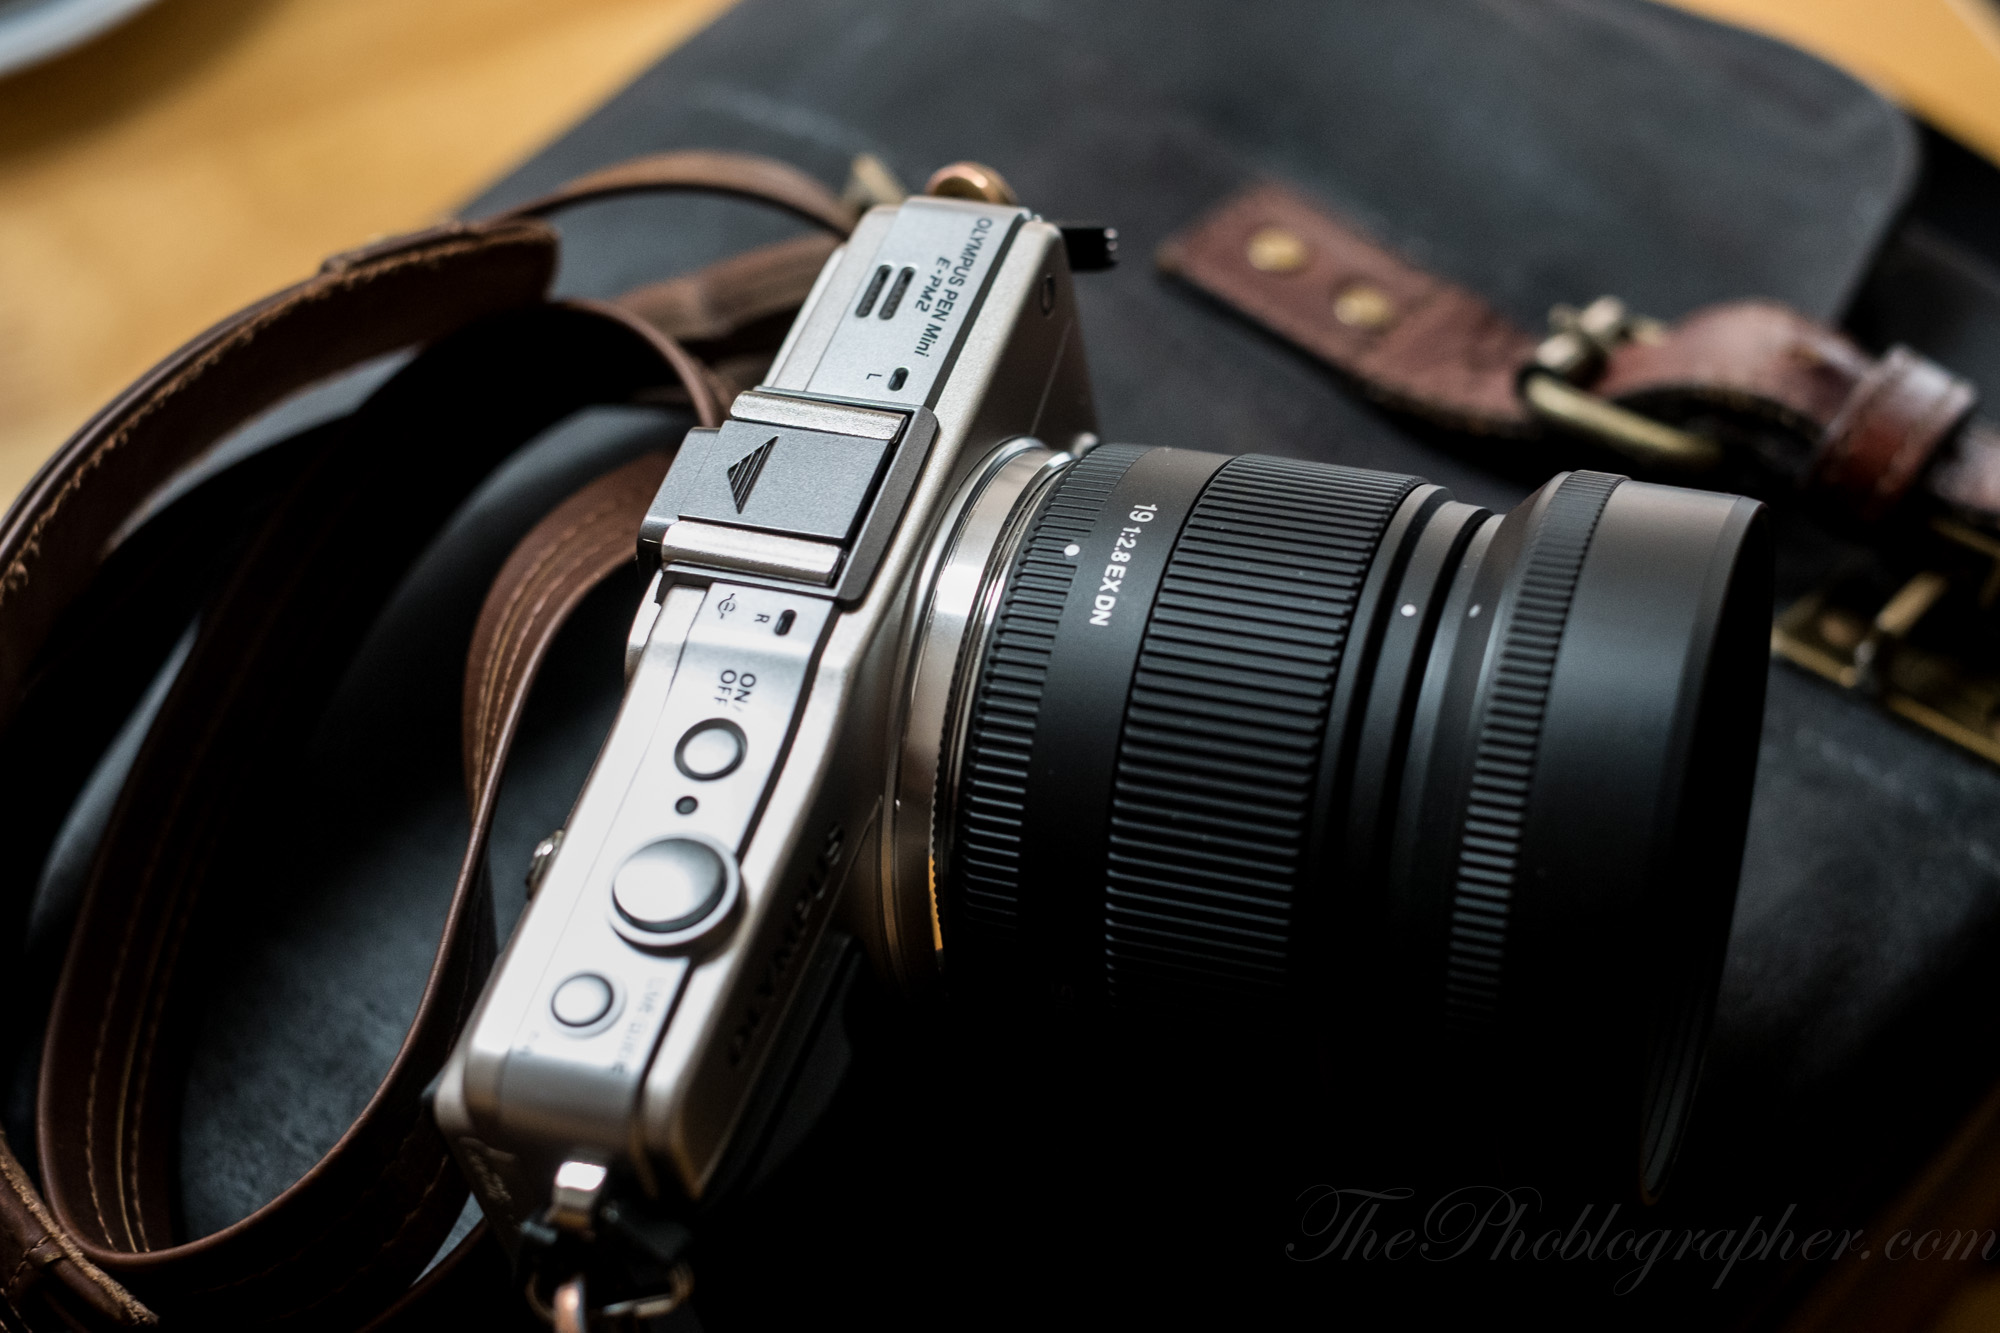 Review: Olympus EPM2 - The Phoblographer